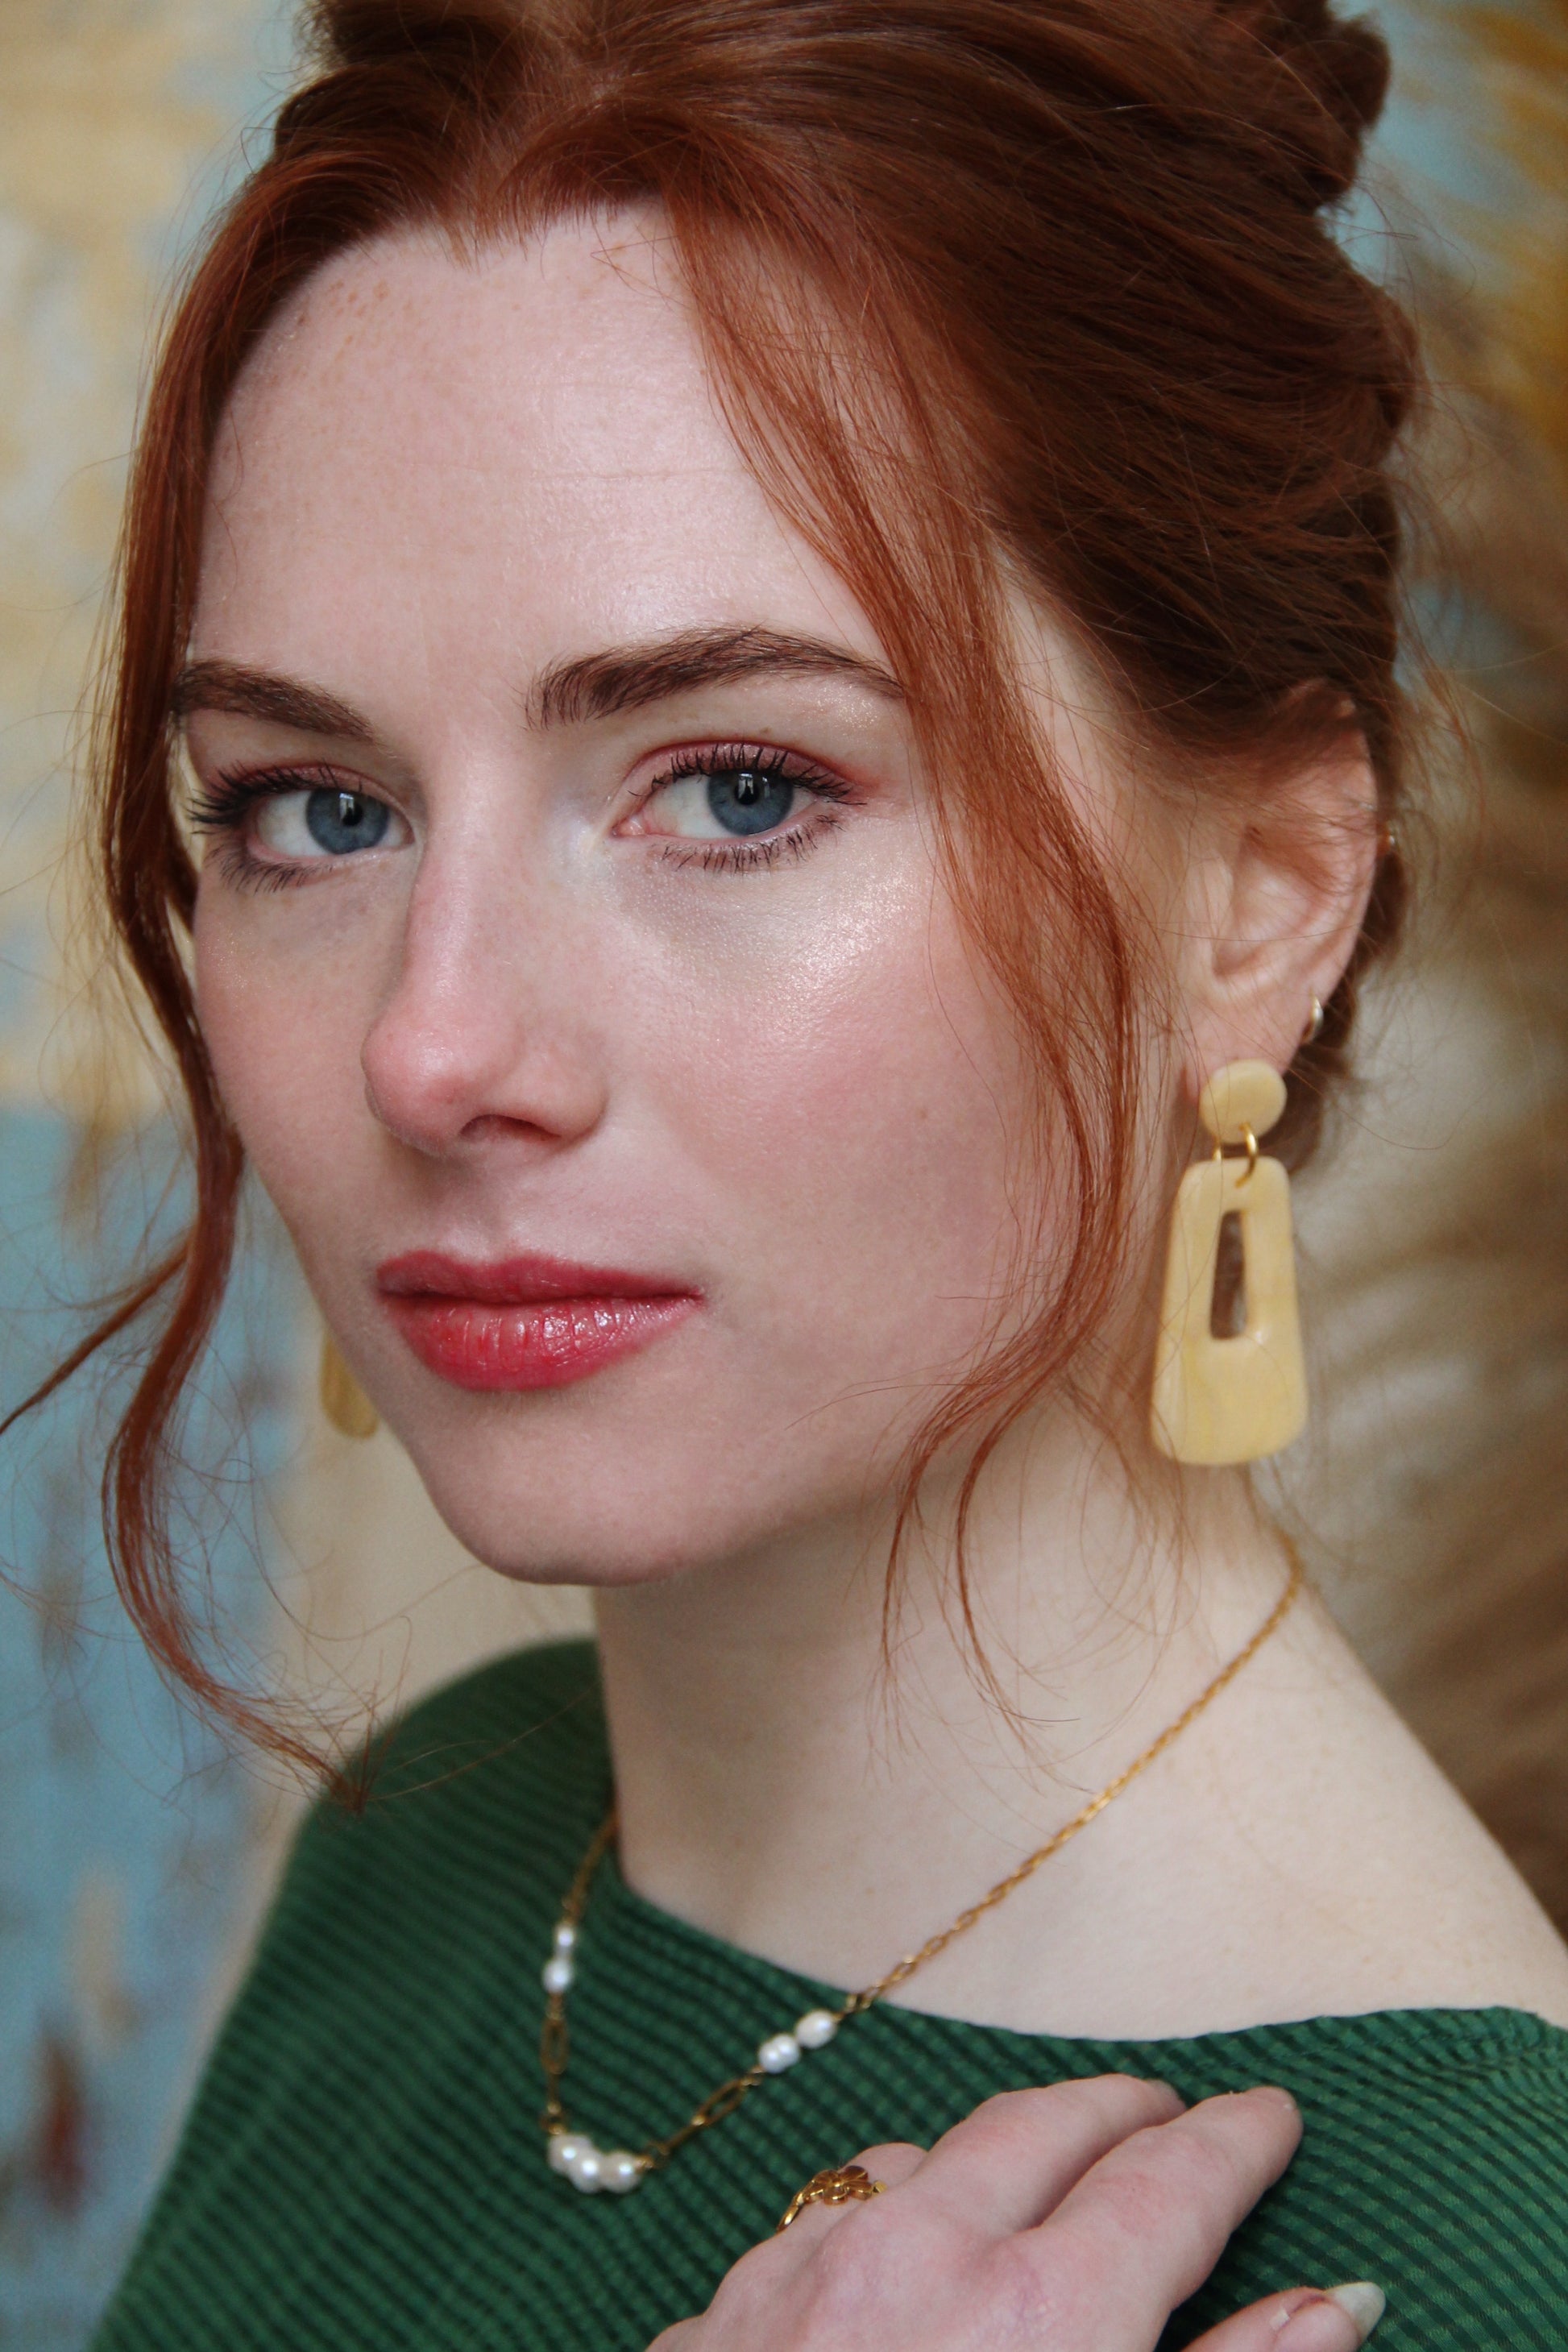 Gorgeous young woman wearing the Audrey earrings in a glossy golden color by the brand Dress To Finesse. This brand is created by Anna De Ceulaer in Antwerp, Belgium. The Audrey earrings are made of clay and are very lightweight. The model is also wearing the Fae necklace which features genuine freshwater pearls.